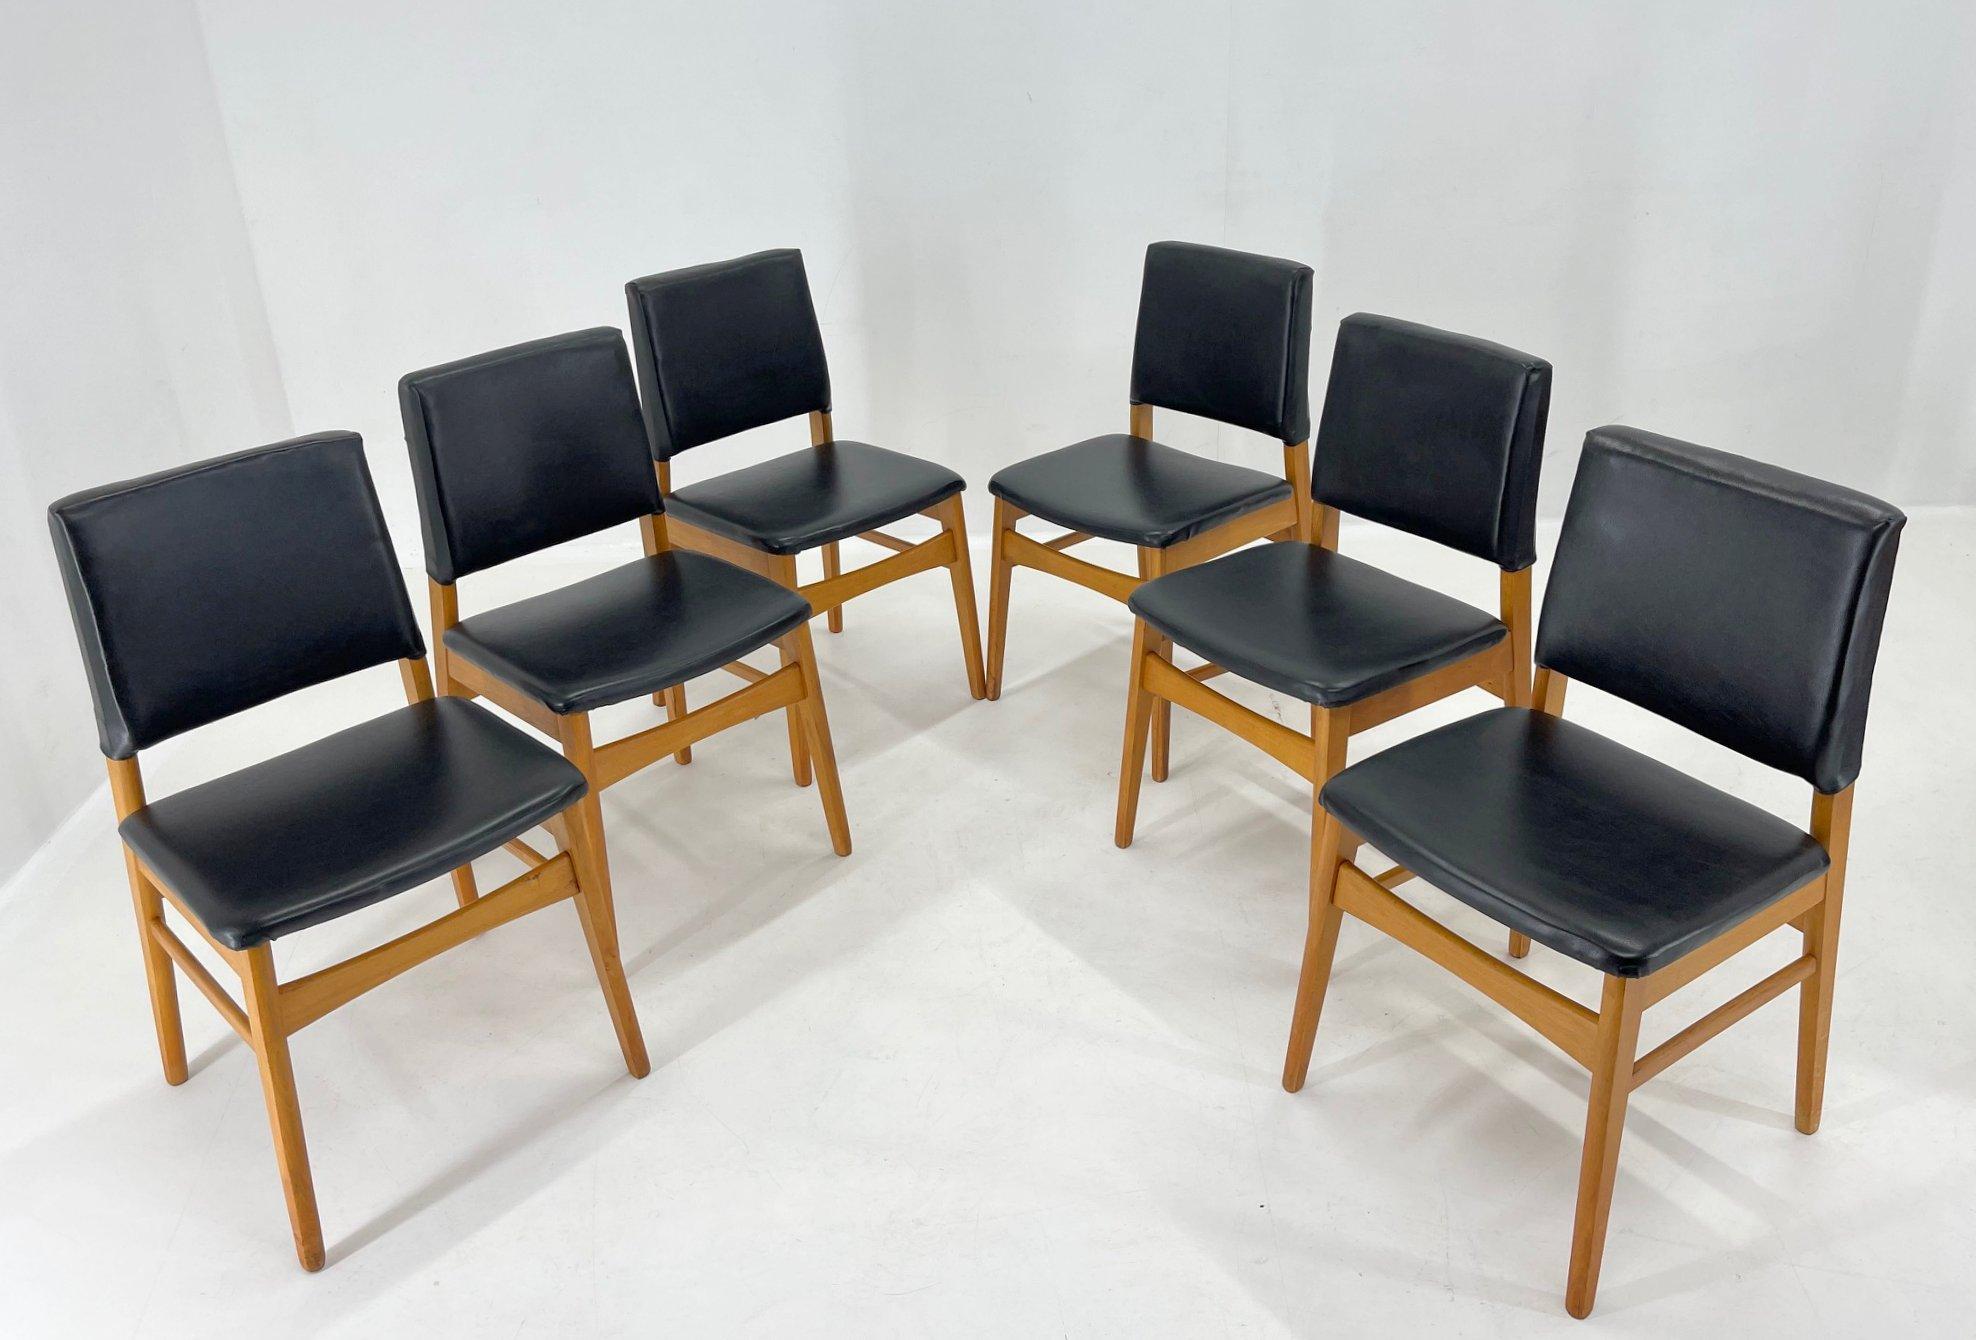 Set of 6 Leatherette & Wood Chairs, Czechoslovakia, 1960's In Good Condition For Sale In Praha, CZ